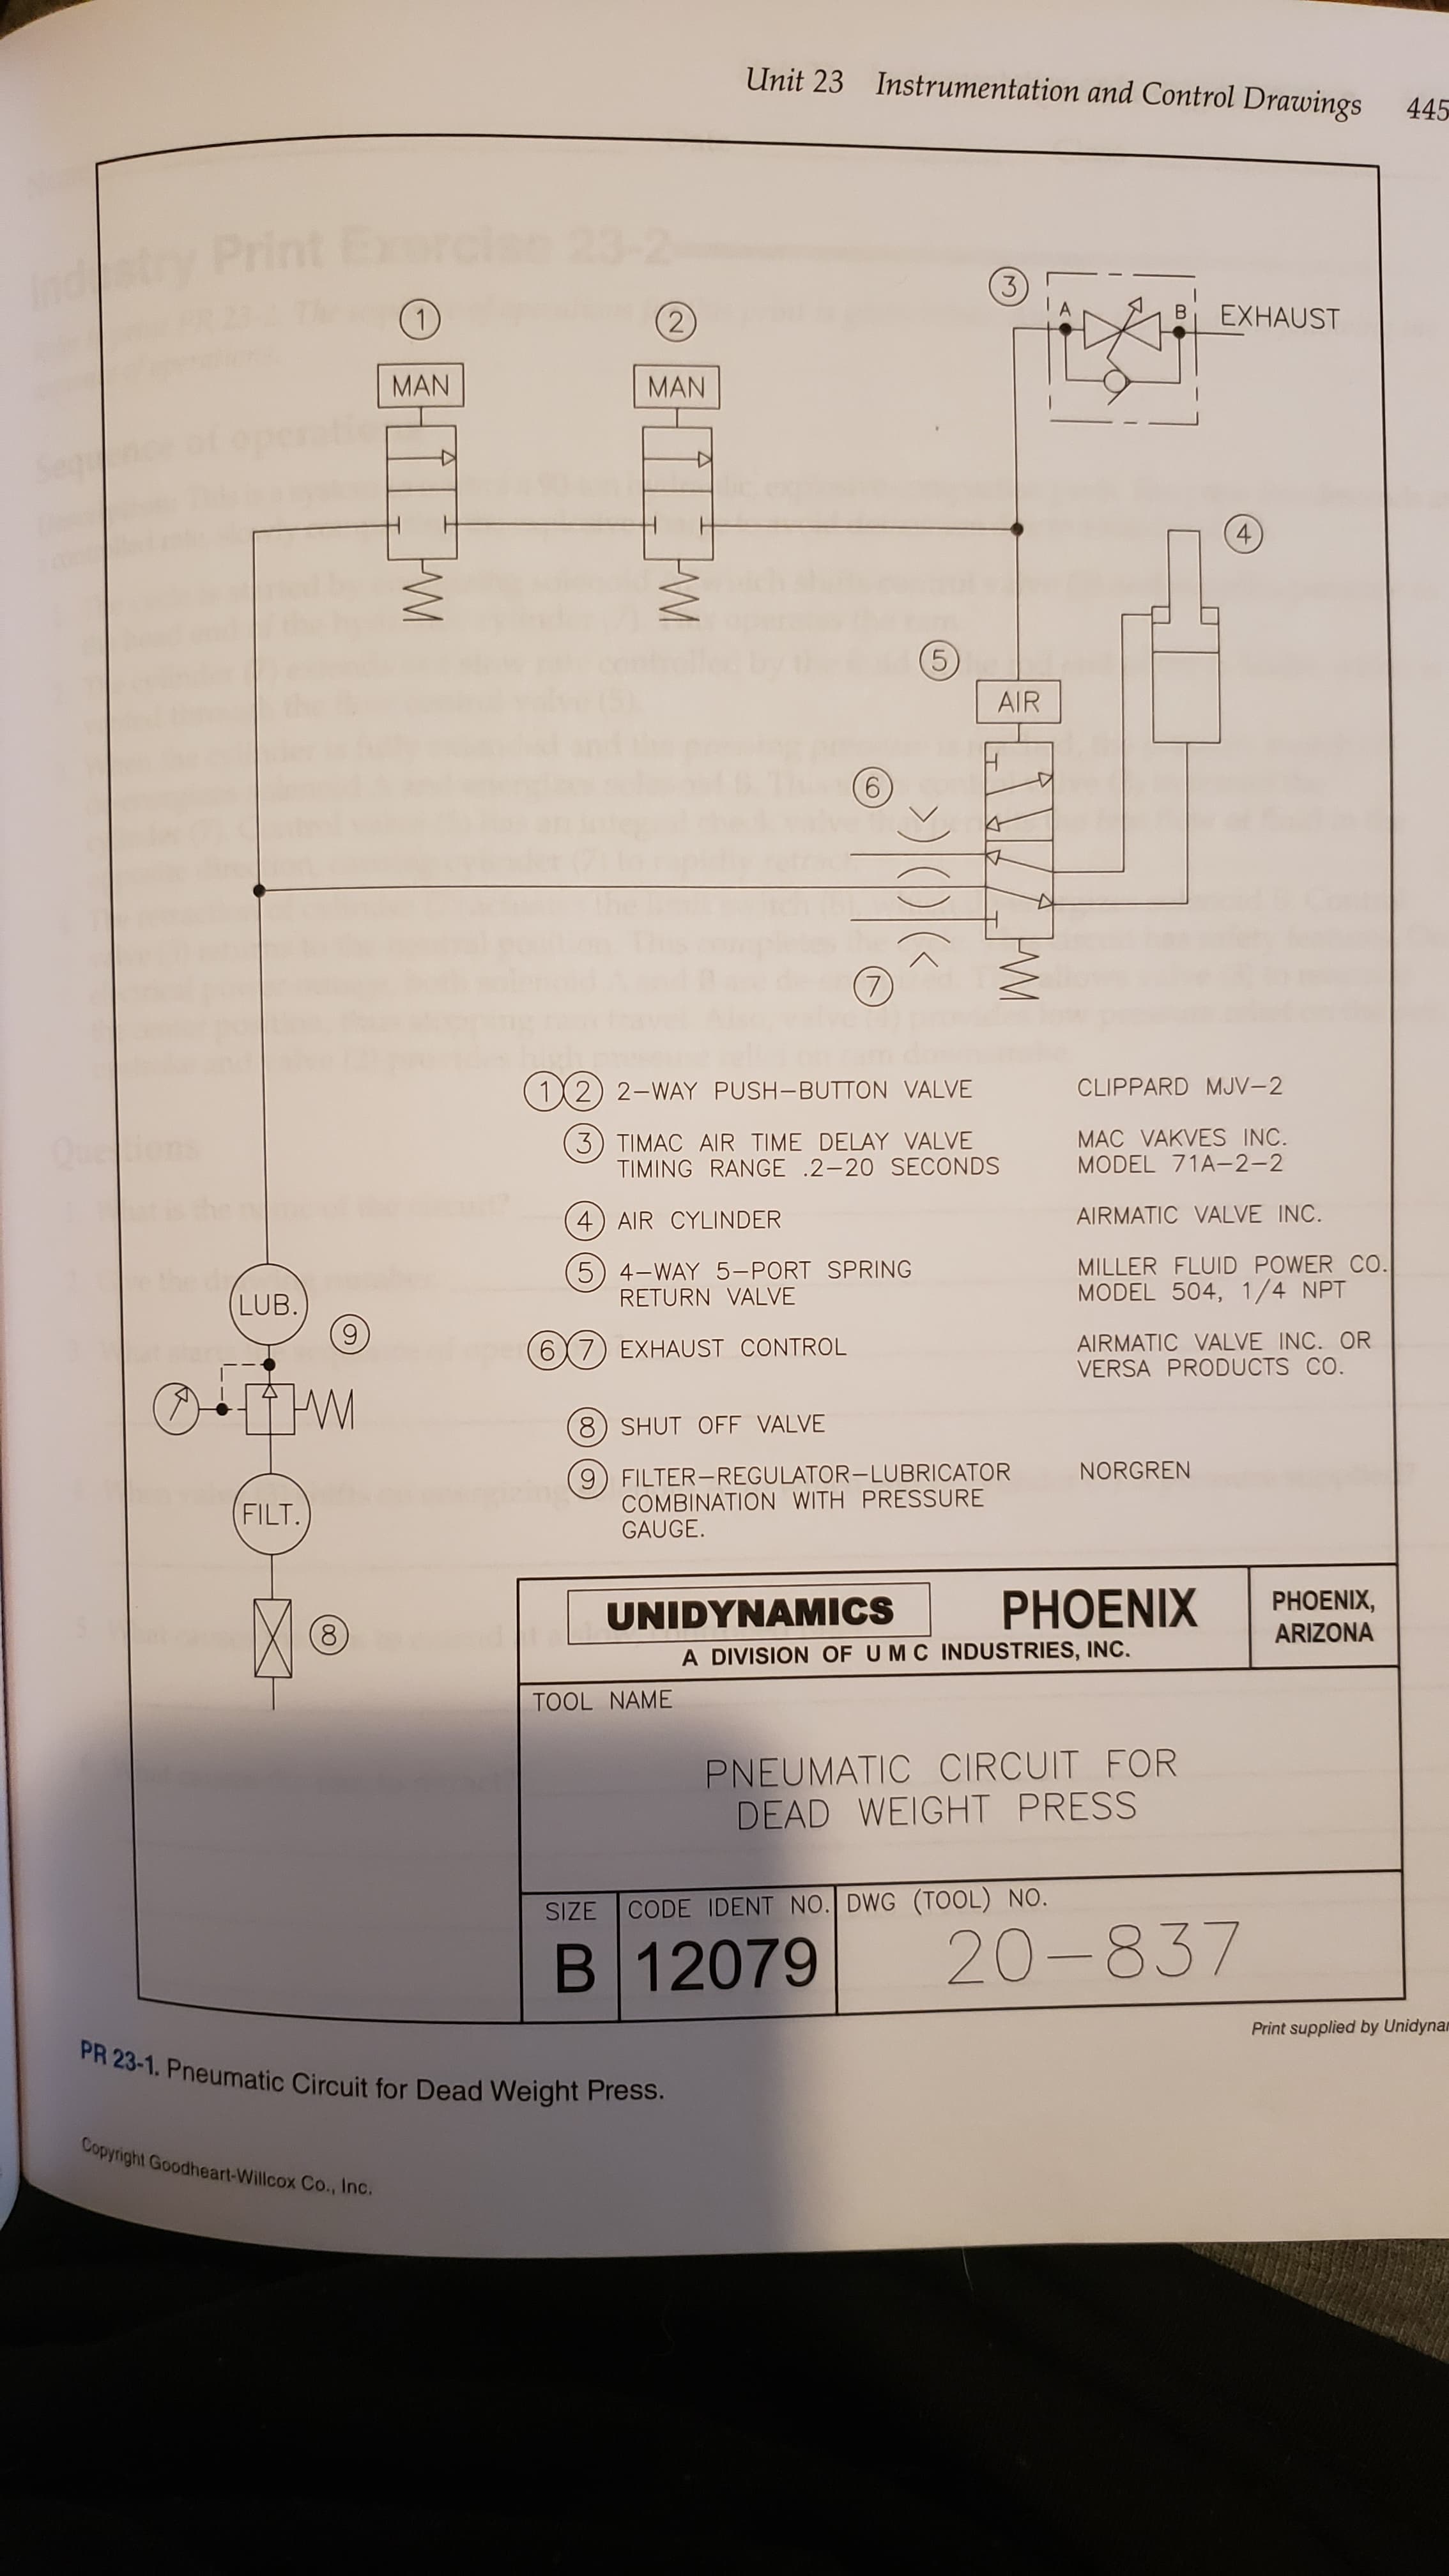 Unit 23
Instrumentation and Control Drawings
445
rch
yPrint Ex
3)
EXHAUST
2)
MAN
MAN
Segu
4
AIR
9.
(7)
CLIPPARD MJV-2
12) 2-WAY PUSH-BUTTON VALVE
3) TIMAC AIR TIME DELAY VALVE
TIMING RANGE .2-20 SECONDS
MAC VAKVES INC.
MODEL 71A-2-2
Queie
AIRMATIC VALVE INC.
4) AIR CYLINDER
MILLER FLUID POWER CO.
MODEL 504, 1/4 NPT
(5) 4-WAY 5-PORT SPRING
RETURN VALVE
LUB.
9.
AIRMATIC VALVE INC. OR
VERSA PRODUCTS CO.
67) EXHAUST CONTROL
8) SHUT OFF VALVE
9) FILTER-REGULATOR-LUBRICATOR
COMBINATION WITH PRESSURE
GAUGE.
NORGREN
FILT.
PHOENIX
PHOENIX,
ARIZONA
UNIDYNAMICS
8.
A DIVISION OF UMC INDUSTRIES, INC.
TOOL NAME
PNEUMATIC CIRCUIT FOR
DEAD WEIGHT PRESS
SIZE CODE IDENT NO. DWG (TOOL) NO.
20-837
B 12079
Print supplied by Unidynar
PR 23-1. Pneumatic Circuit for Dead Weight Press.
Copyright Goodheart-Willcox Co., Inc.
B.
